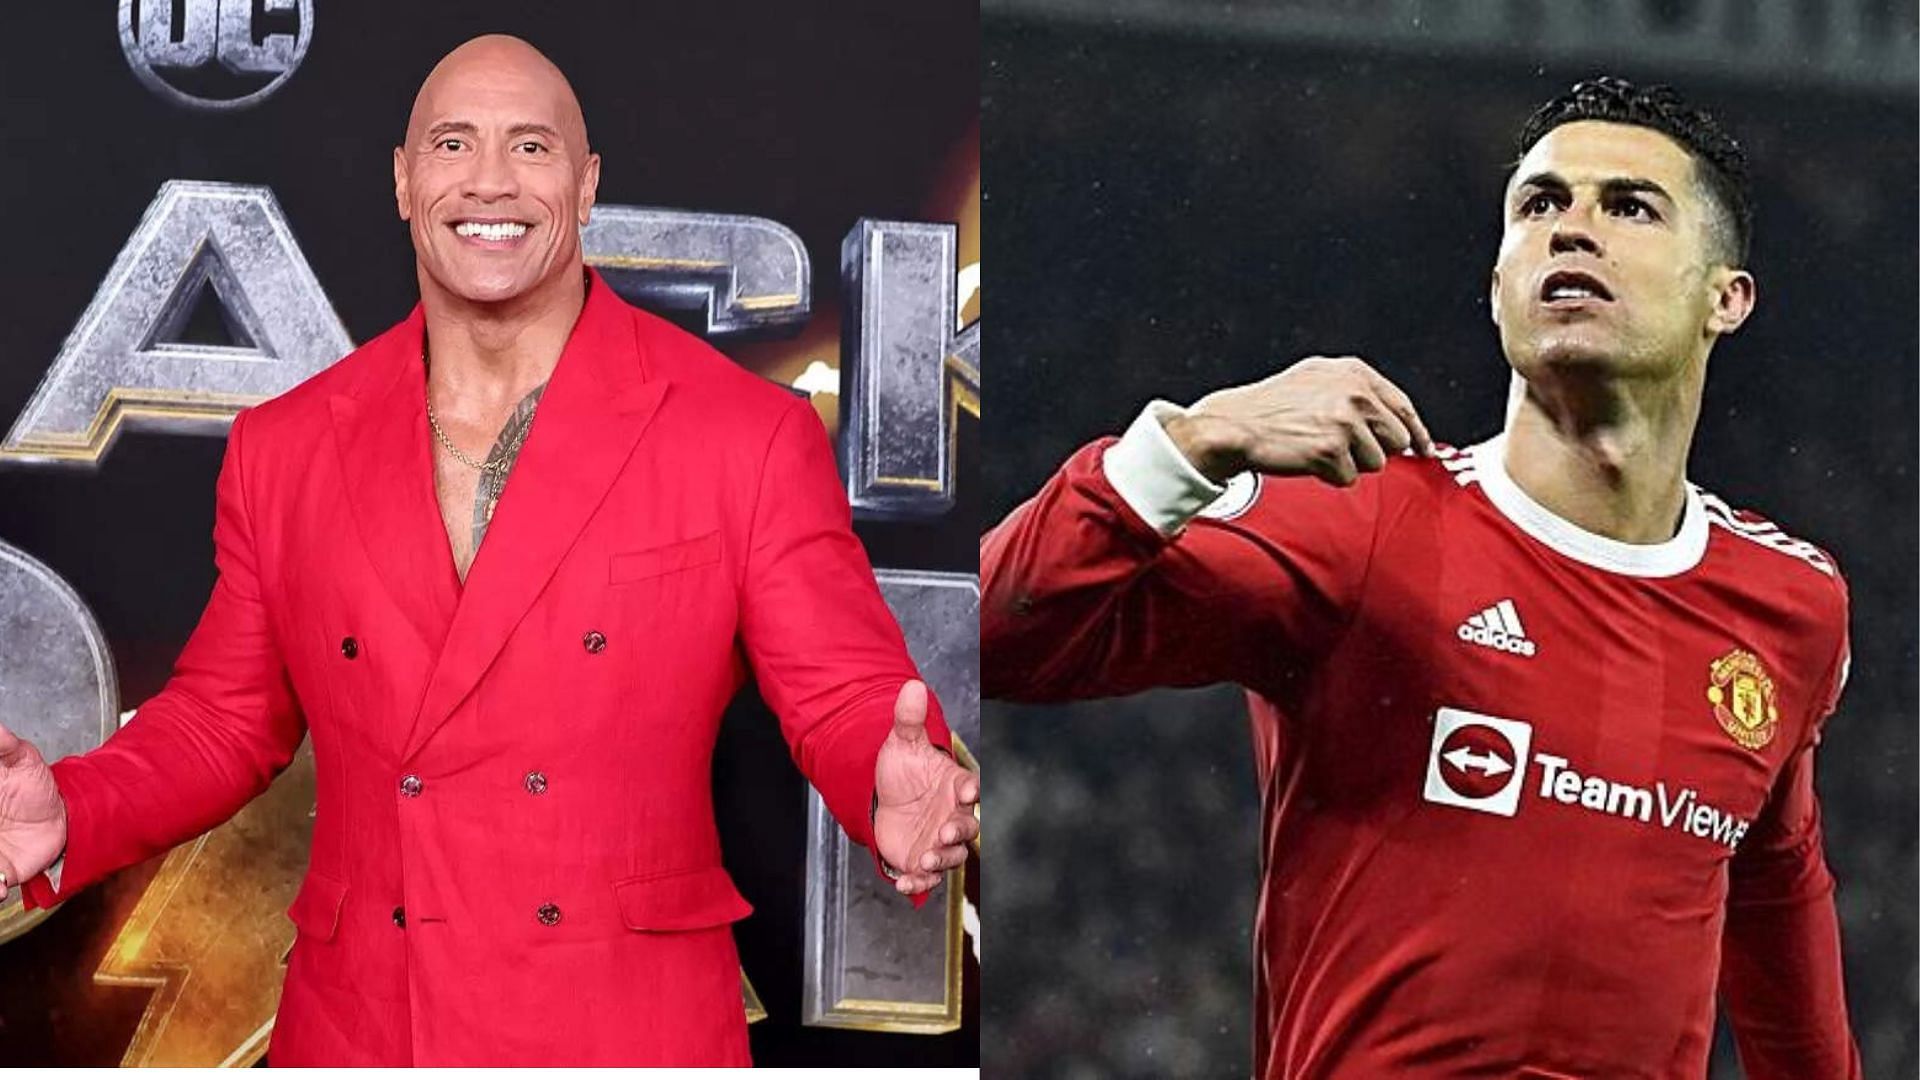 Who has the better net worth - CR7 or The Rock?